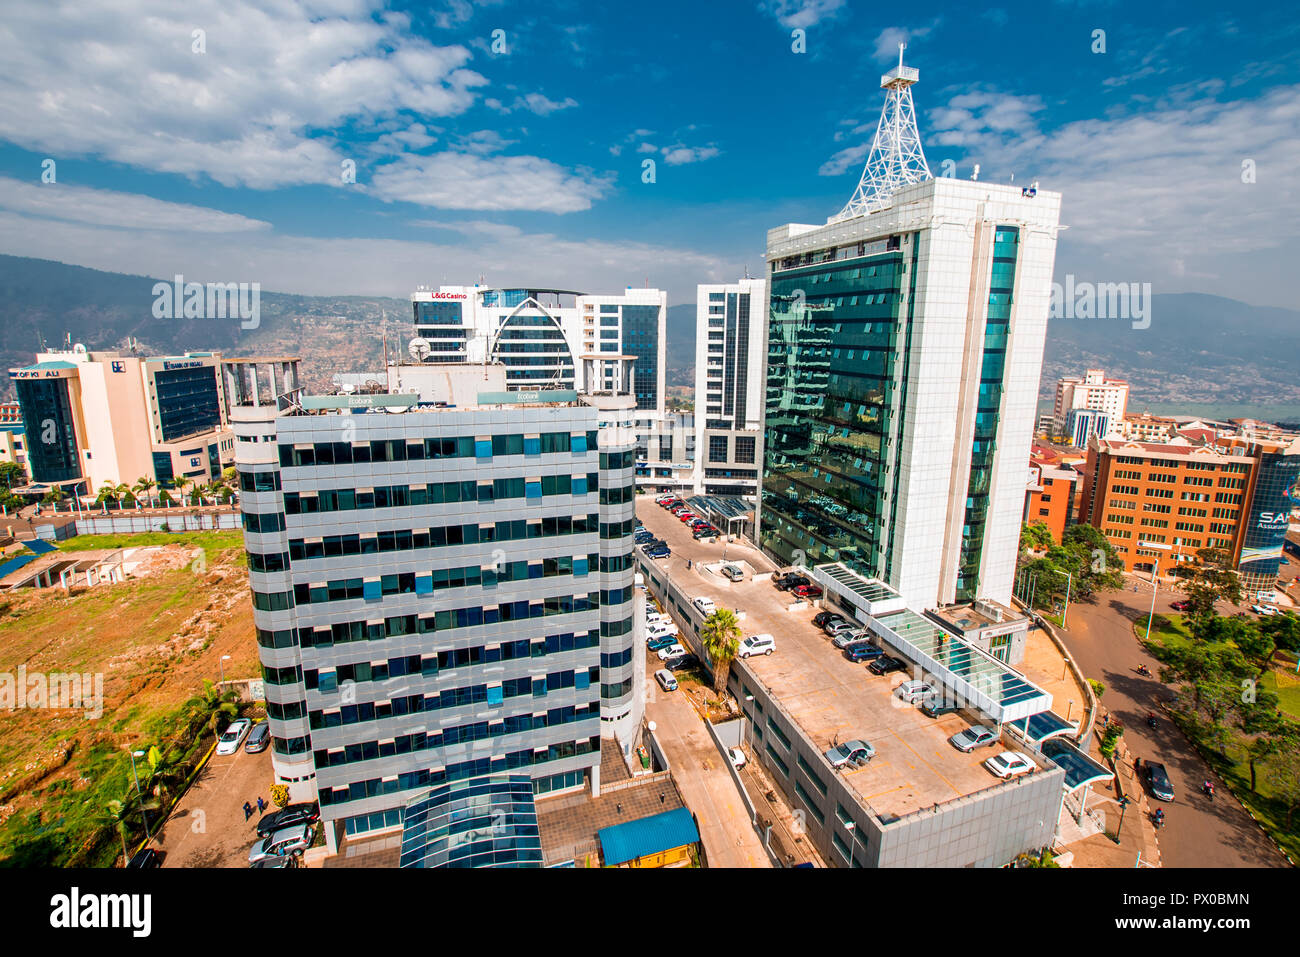 Kigali, Rwanda - September 21, 2018: a wide view looking down on the city centre with Ecobank and Pension Plaza looming in the foreground and Kigali C Stock Photo